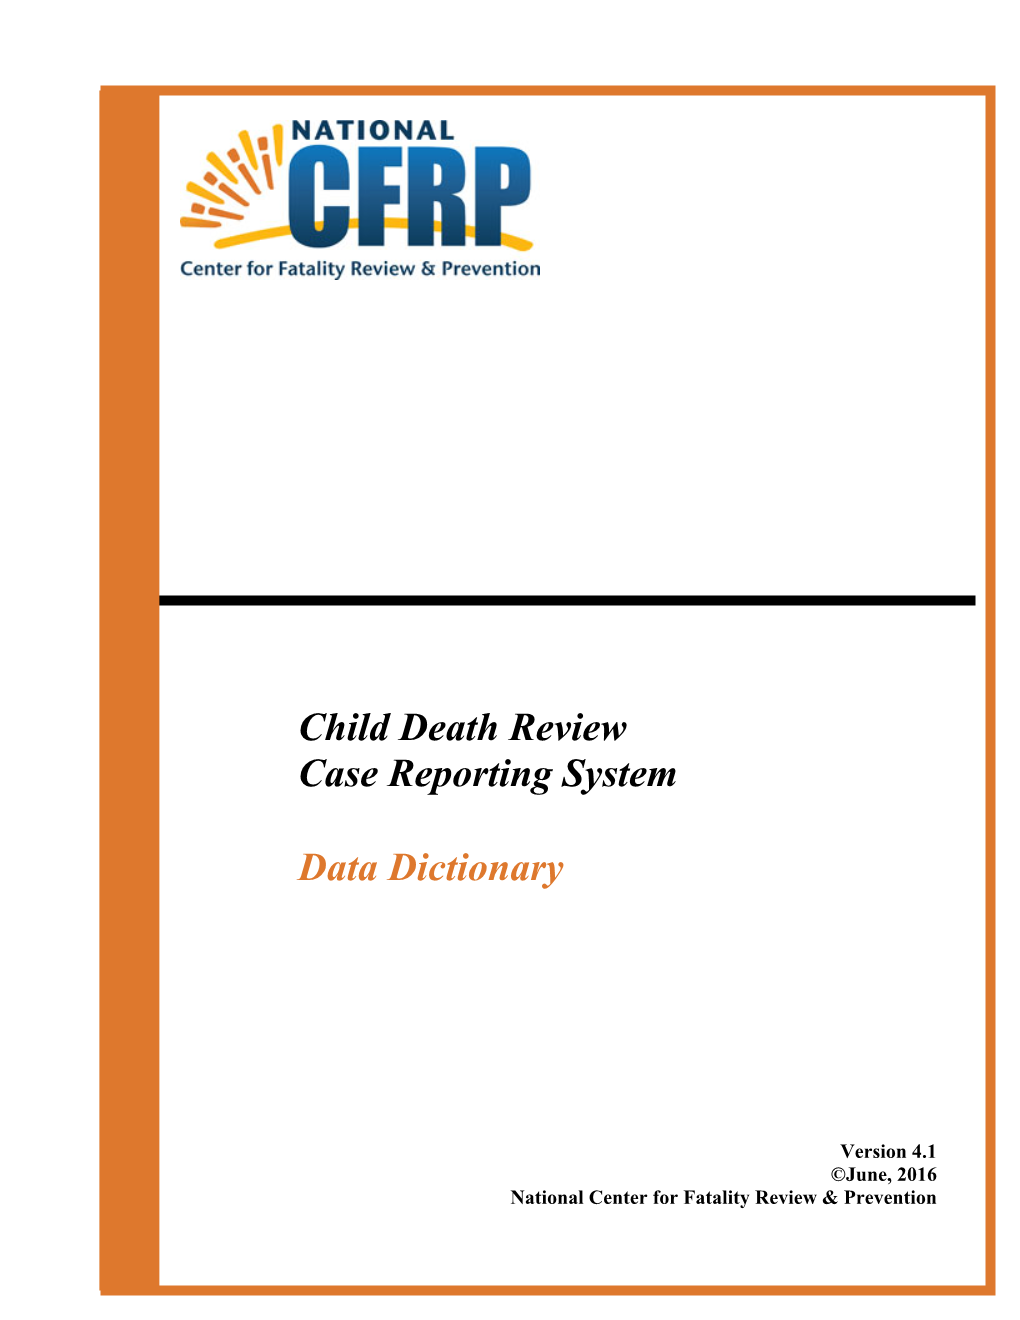 Child Death Review Case Reporting System Data Dictionary